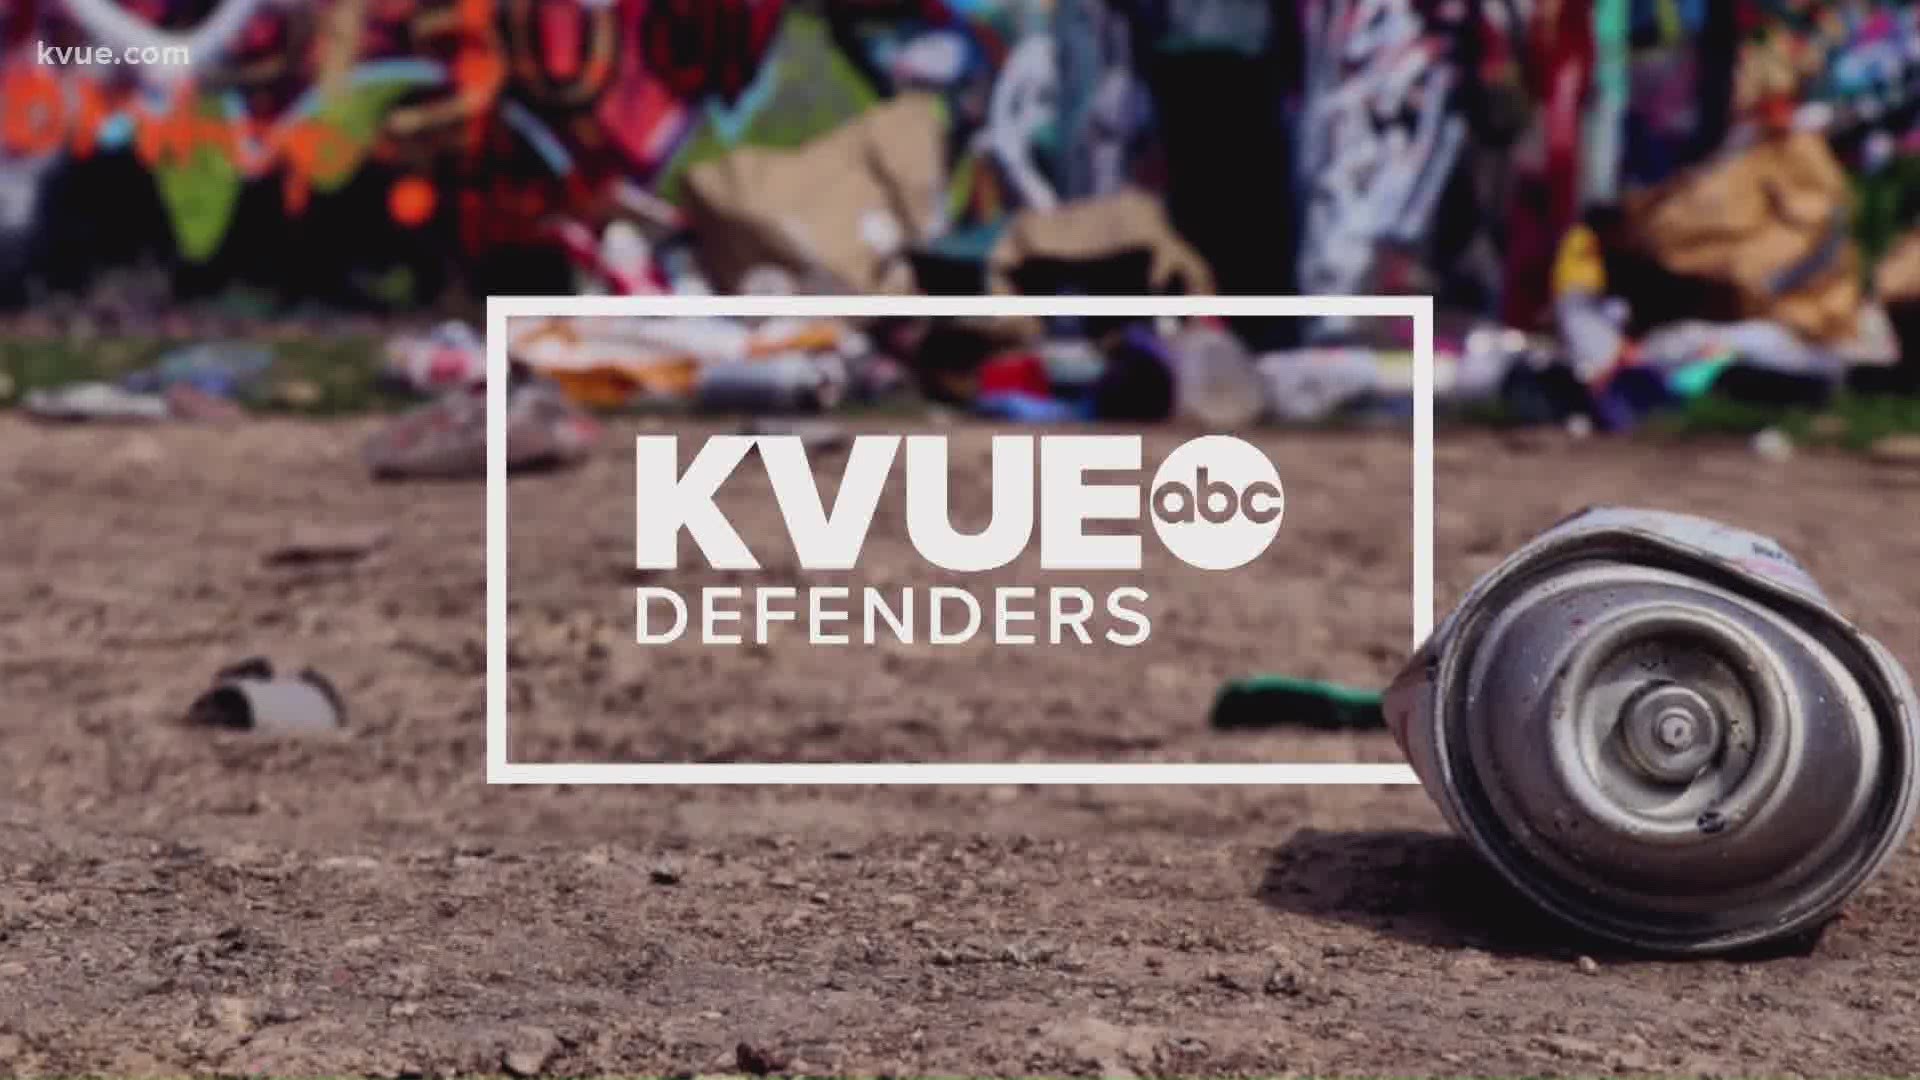 The KVUE Defenders are answering your questions every night.